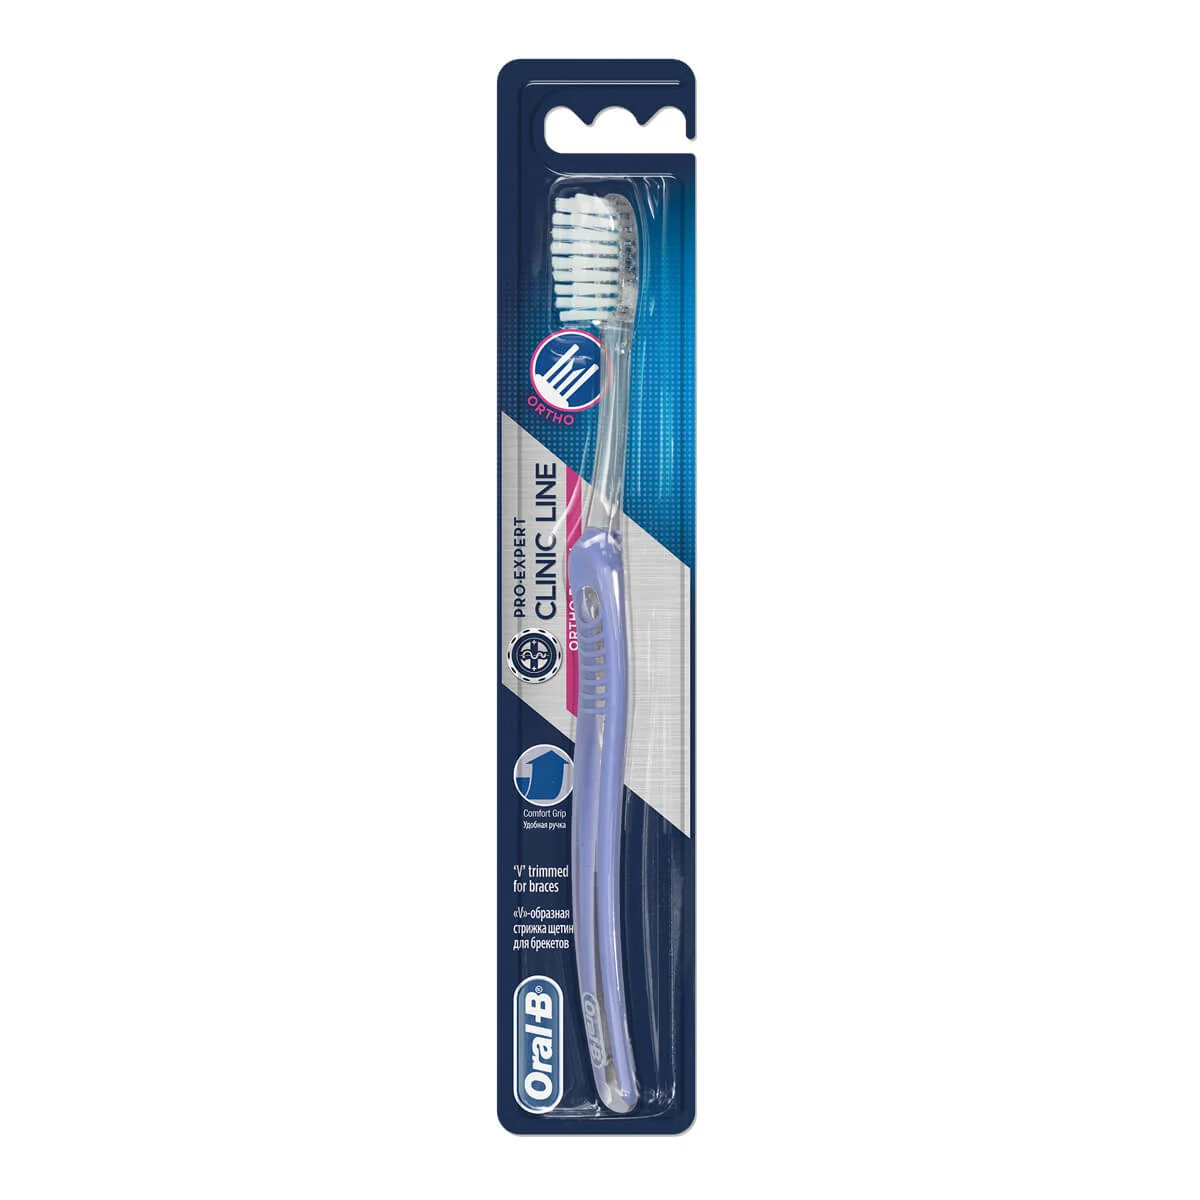 Oral-B Pro-Expert Clinic Line Orthodontic Manual Toothbrush 